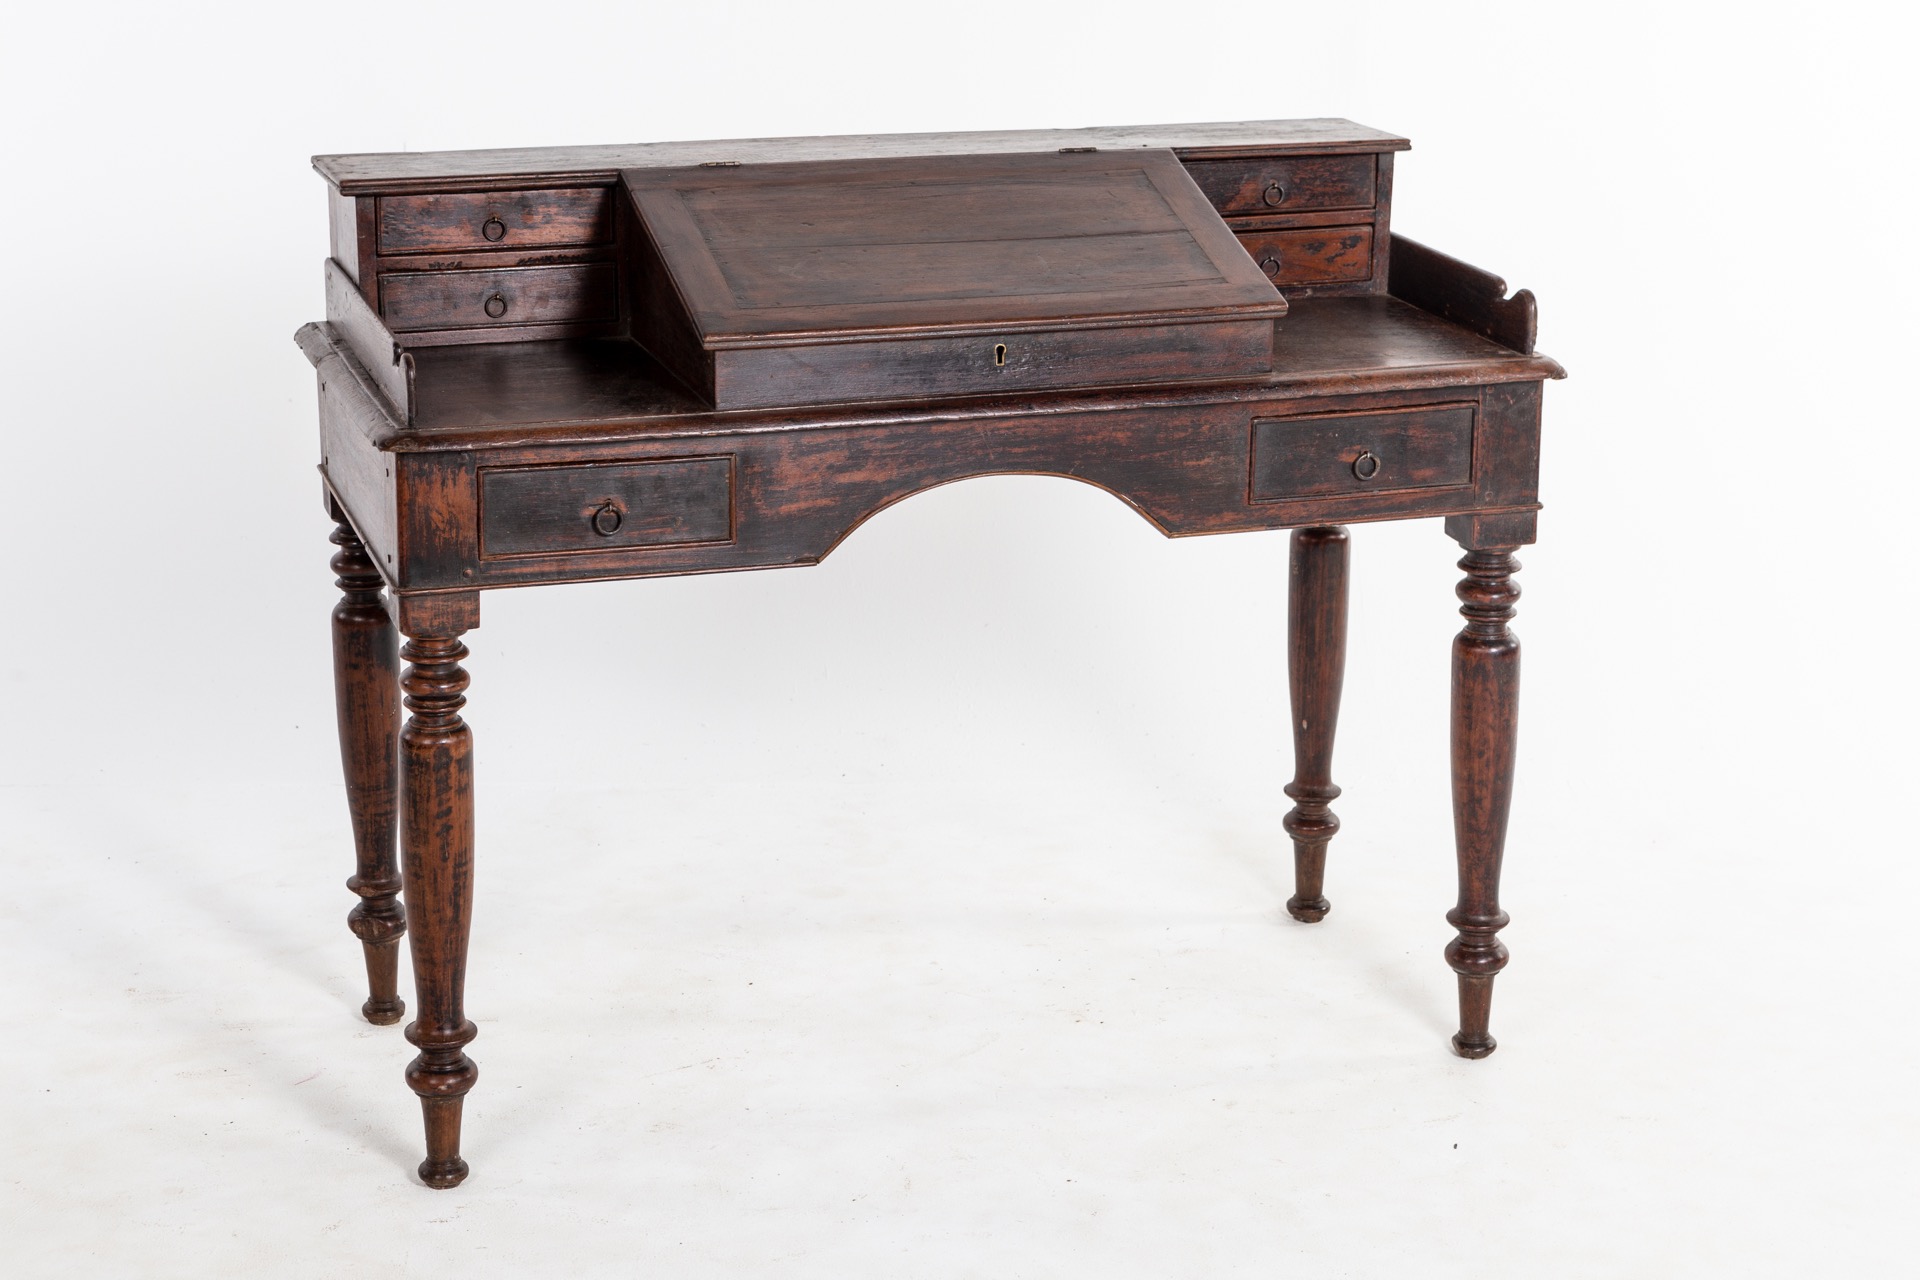 British Colonial Writing Desk With Slanted Top